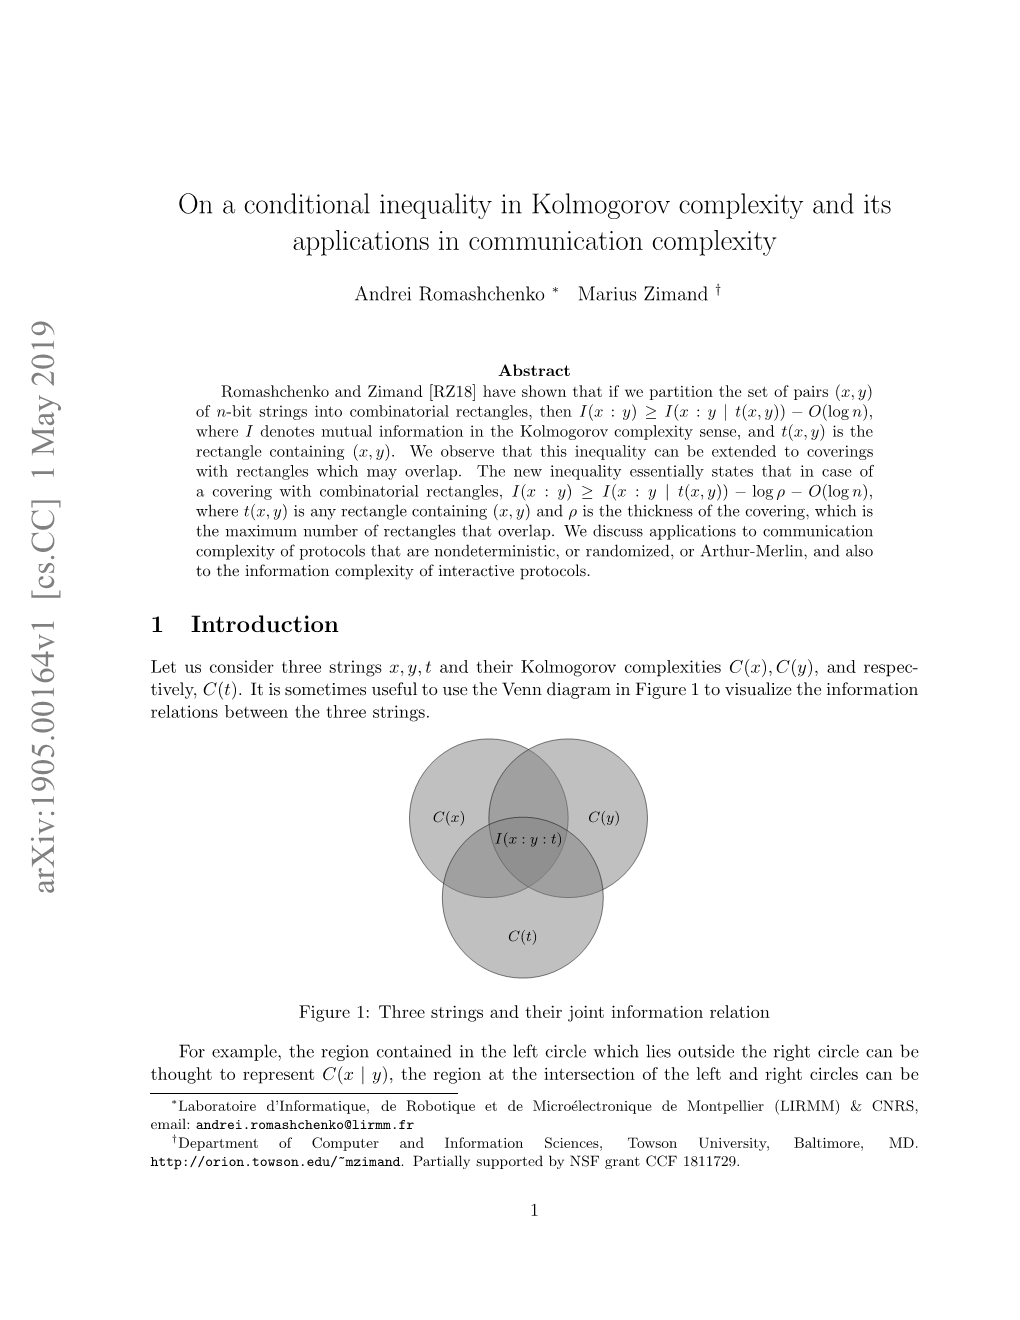 On a Conditional Inequality in Kolmogorov Complexity and Its Applications in Communication Complexity